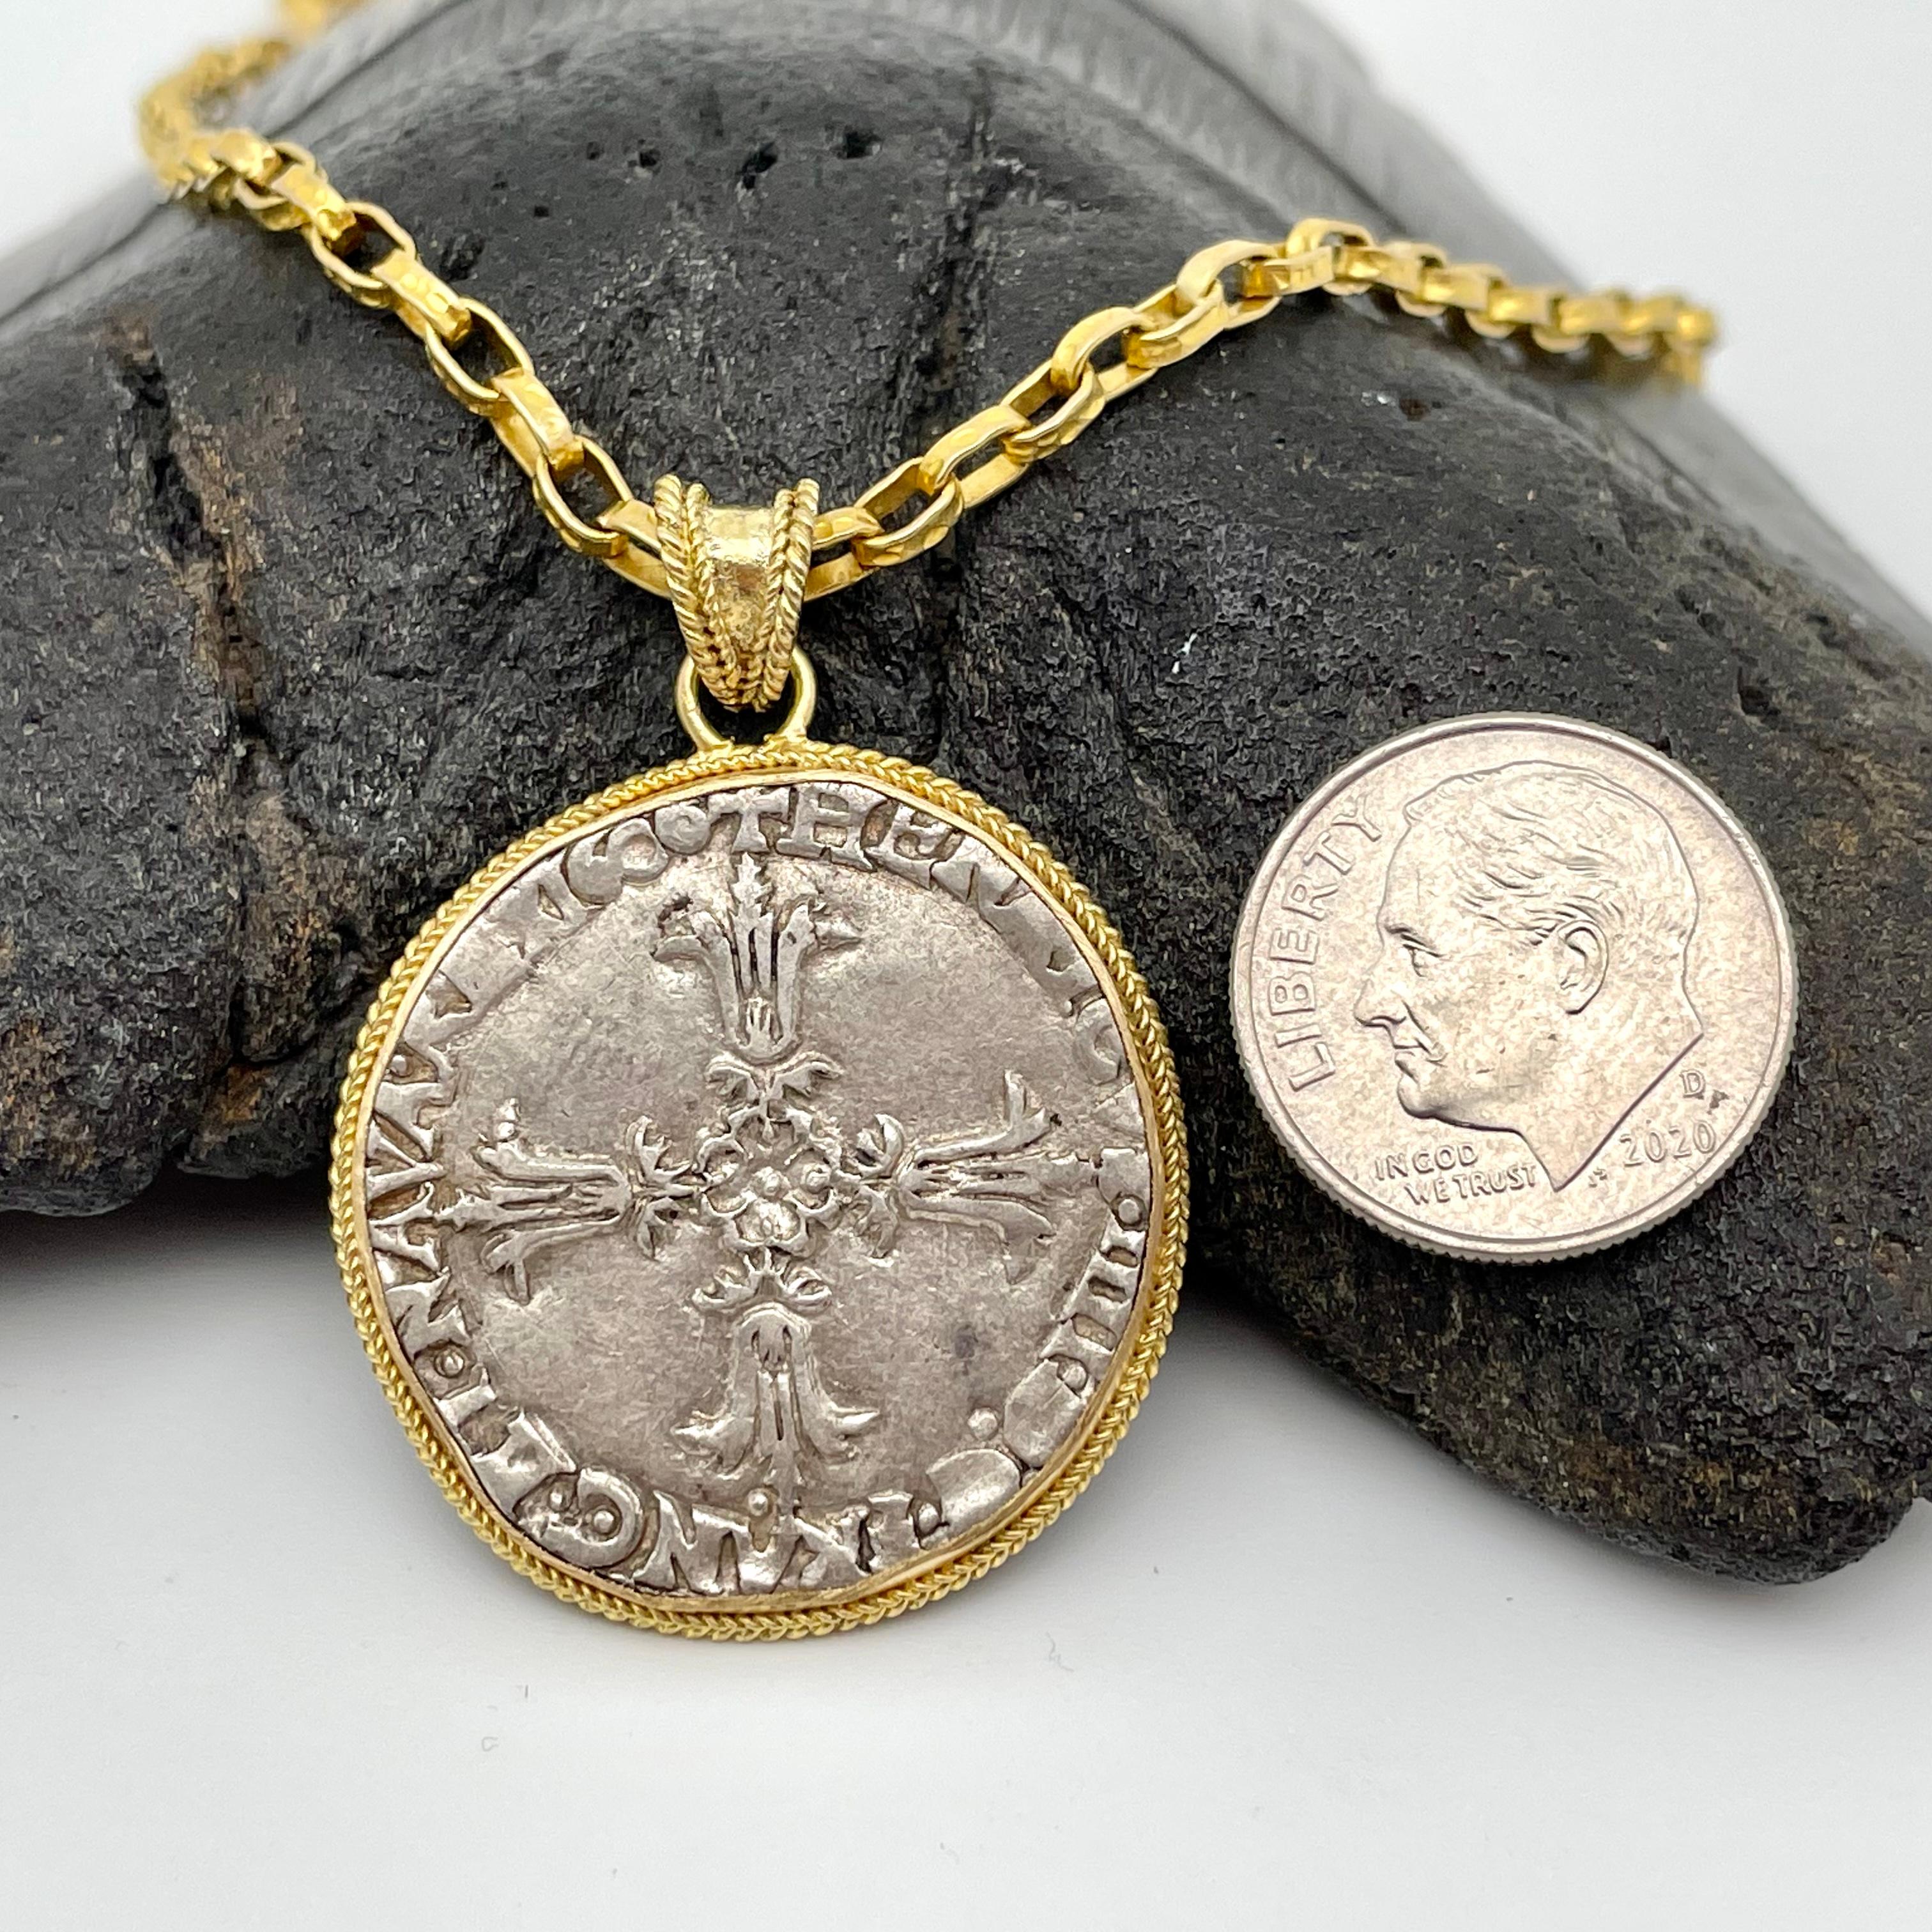 This hand struck French coin introduced by Henry III in 1577 was the primary silver coin of France until milled coins were introduced 1n 1646.  It featured a cross (Croix feuillue) with date on one side, and royal coat of arms with fleur-de-lis on